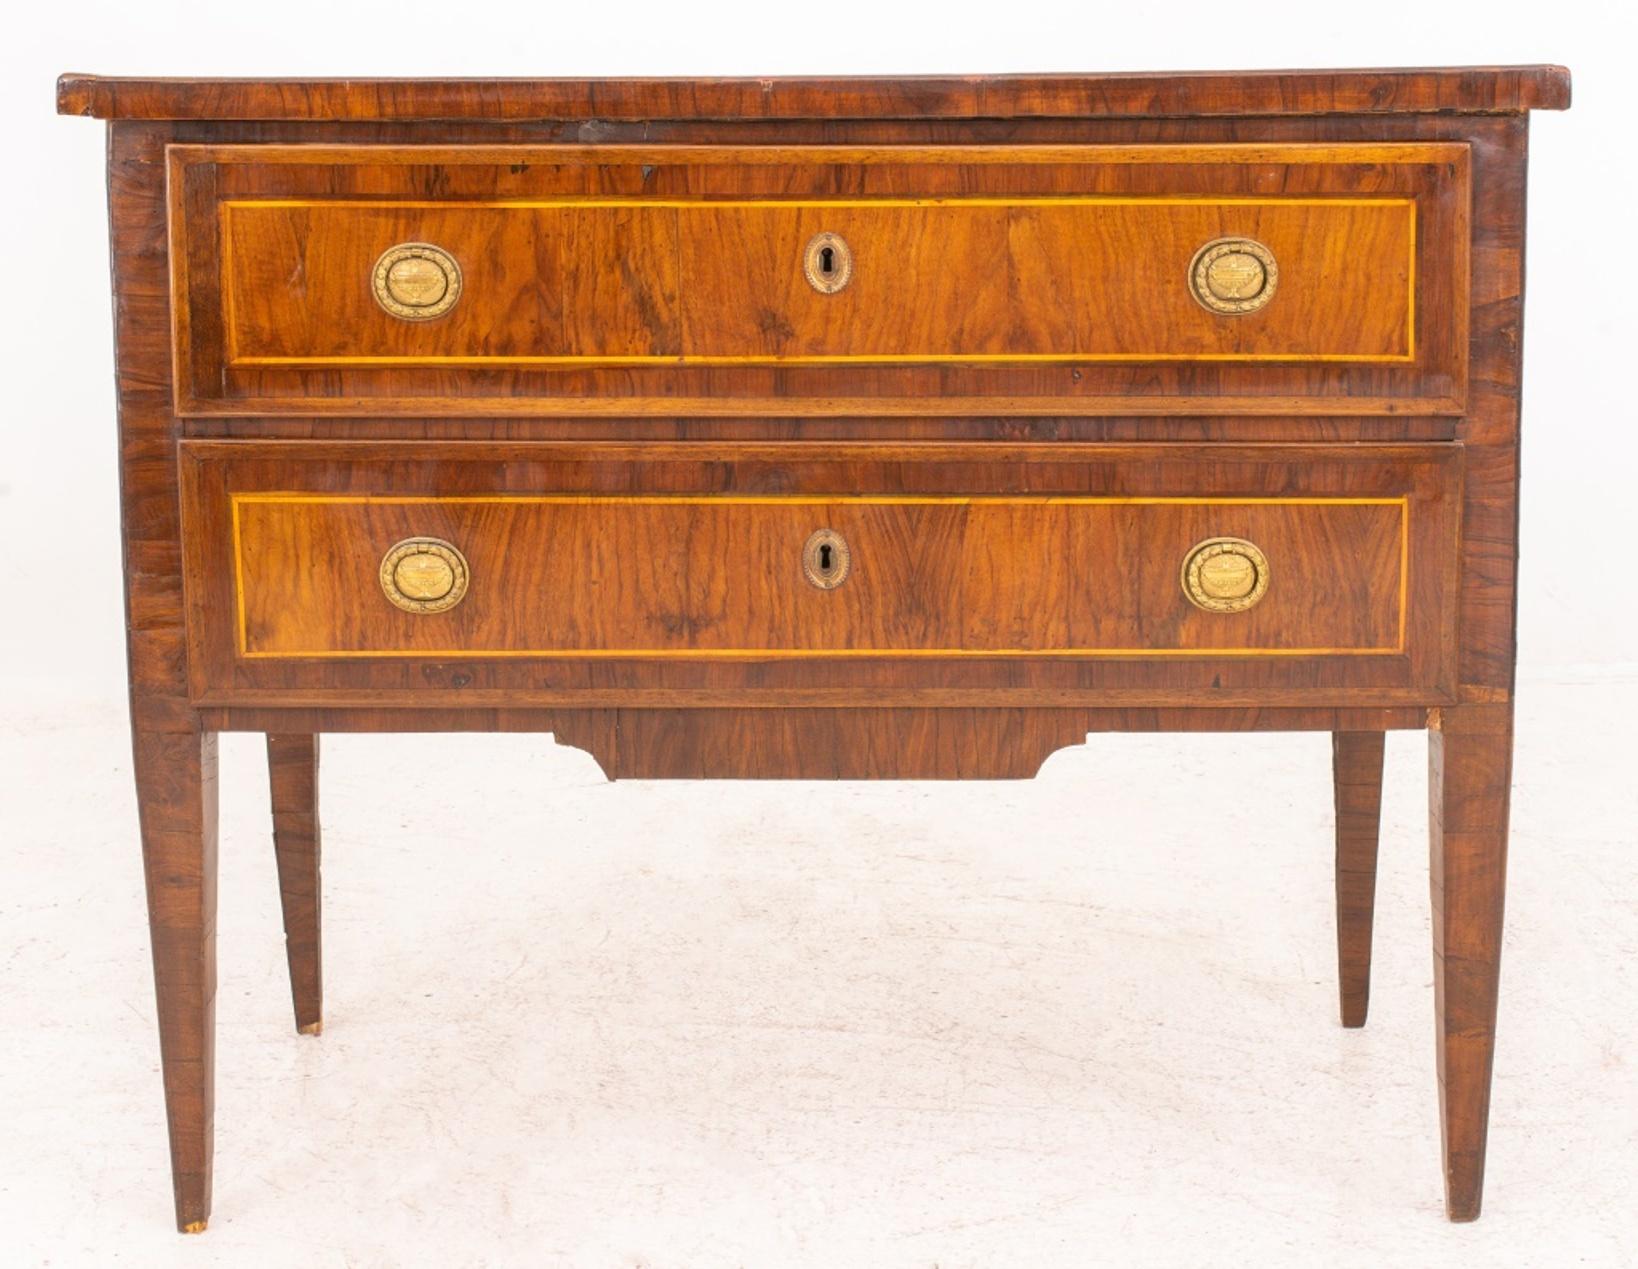 Northern Italian Neoclassical two-drawer commode, the whole veneered in walnut, with the rectangular top above two long drawers with wreath-form pulls, the whole on tapering square feet.

Dimensions: 34